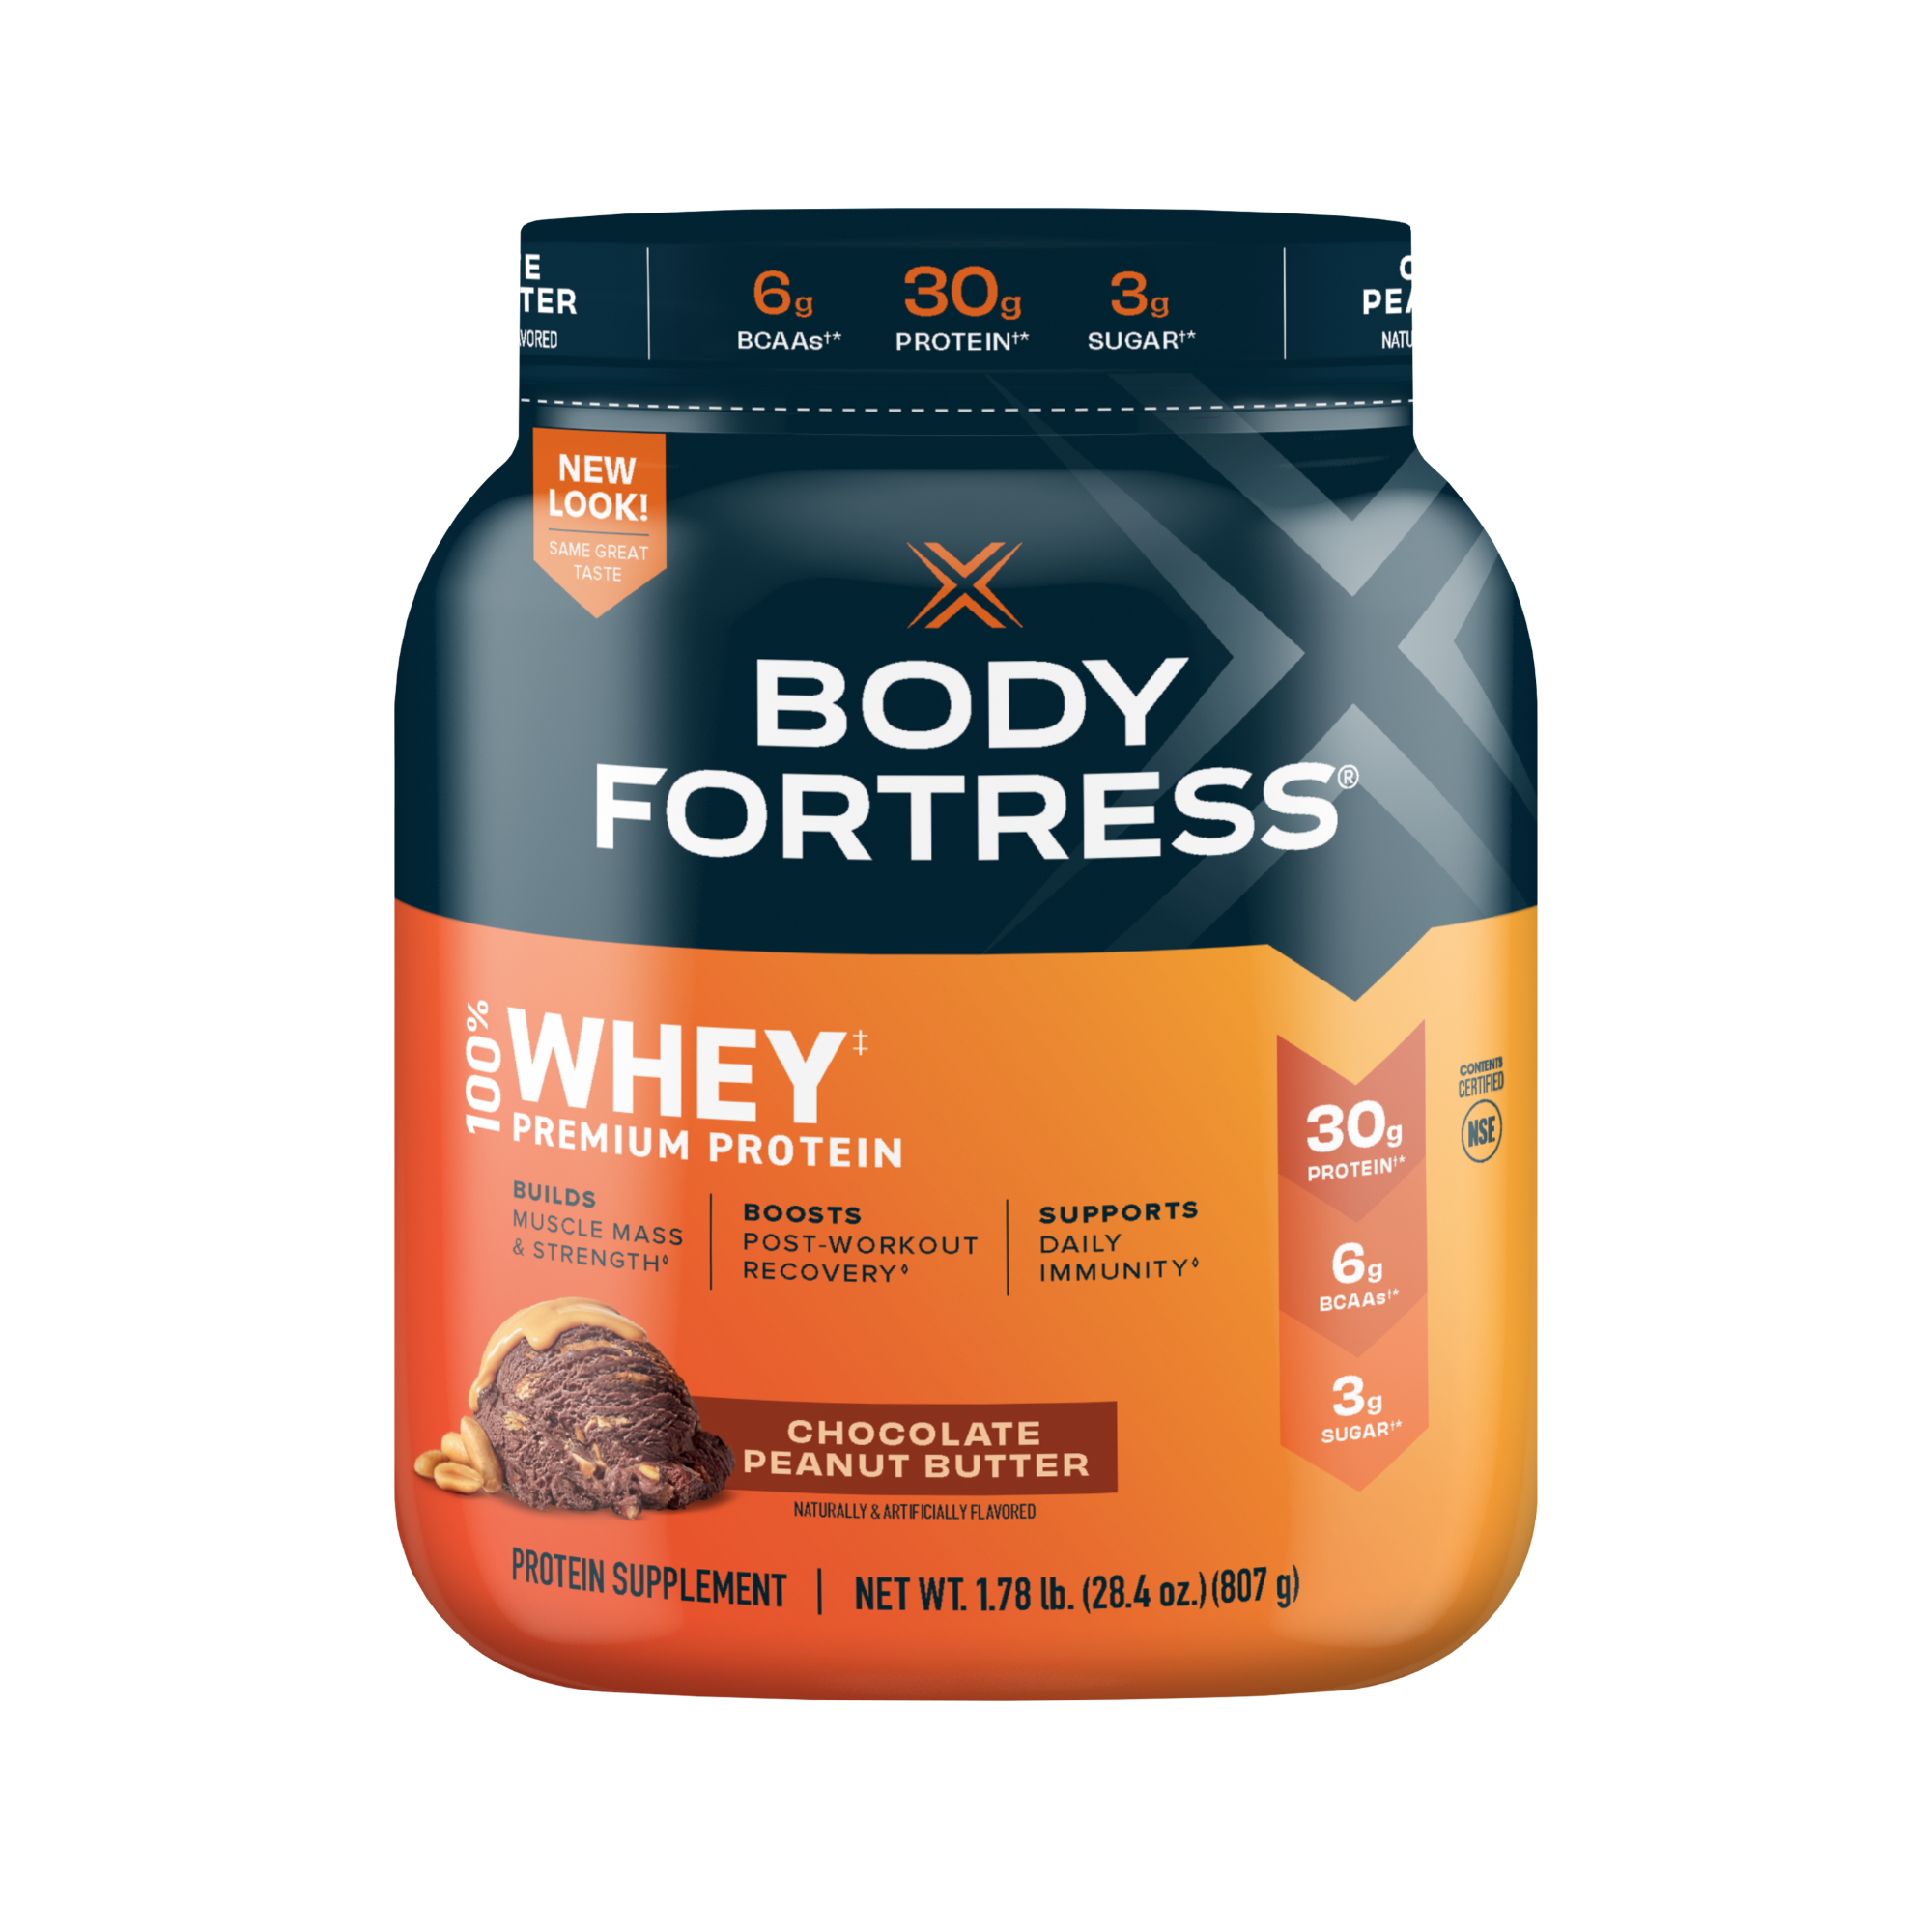 Body Fortress 100% Whey, Premium Protein Powder, Chocolate Peanut Butter, 1.78lbs (Packaging May Vary) - image 1 of 8